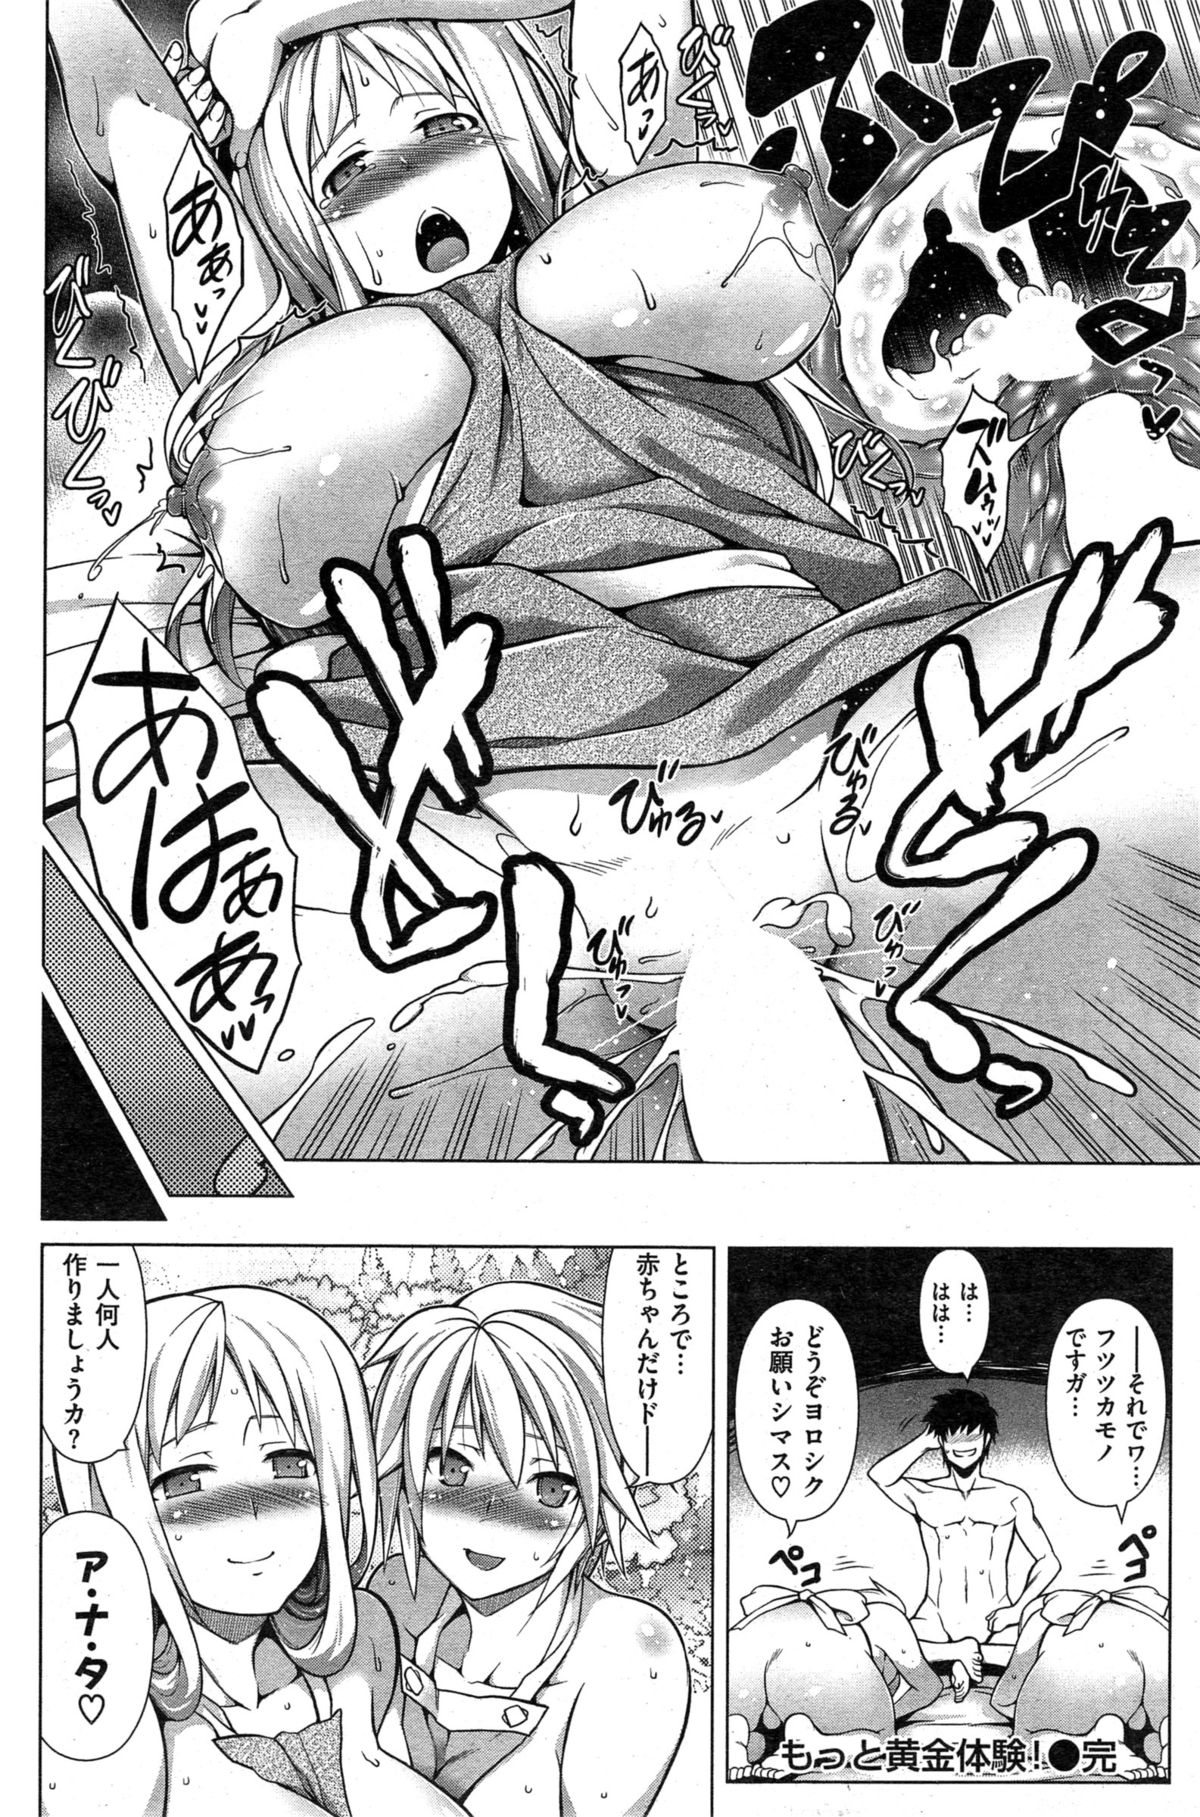 [TANABE] Ougon Taiken - Gold Experience page 36 full